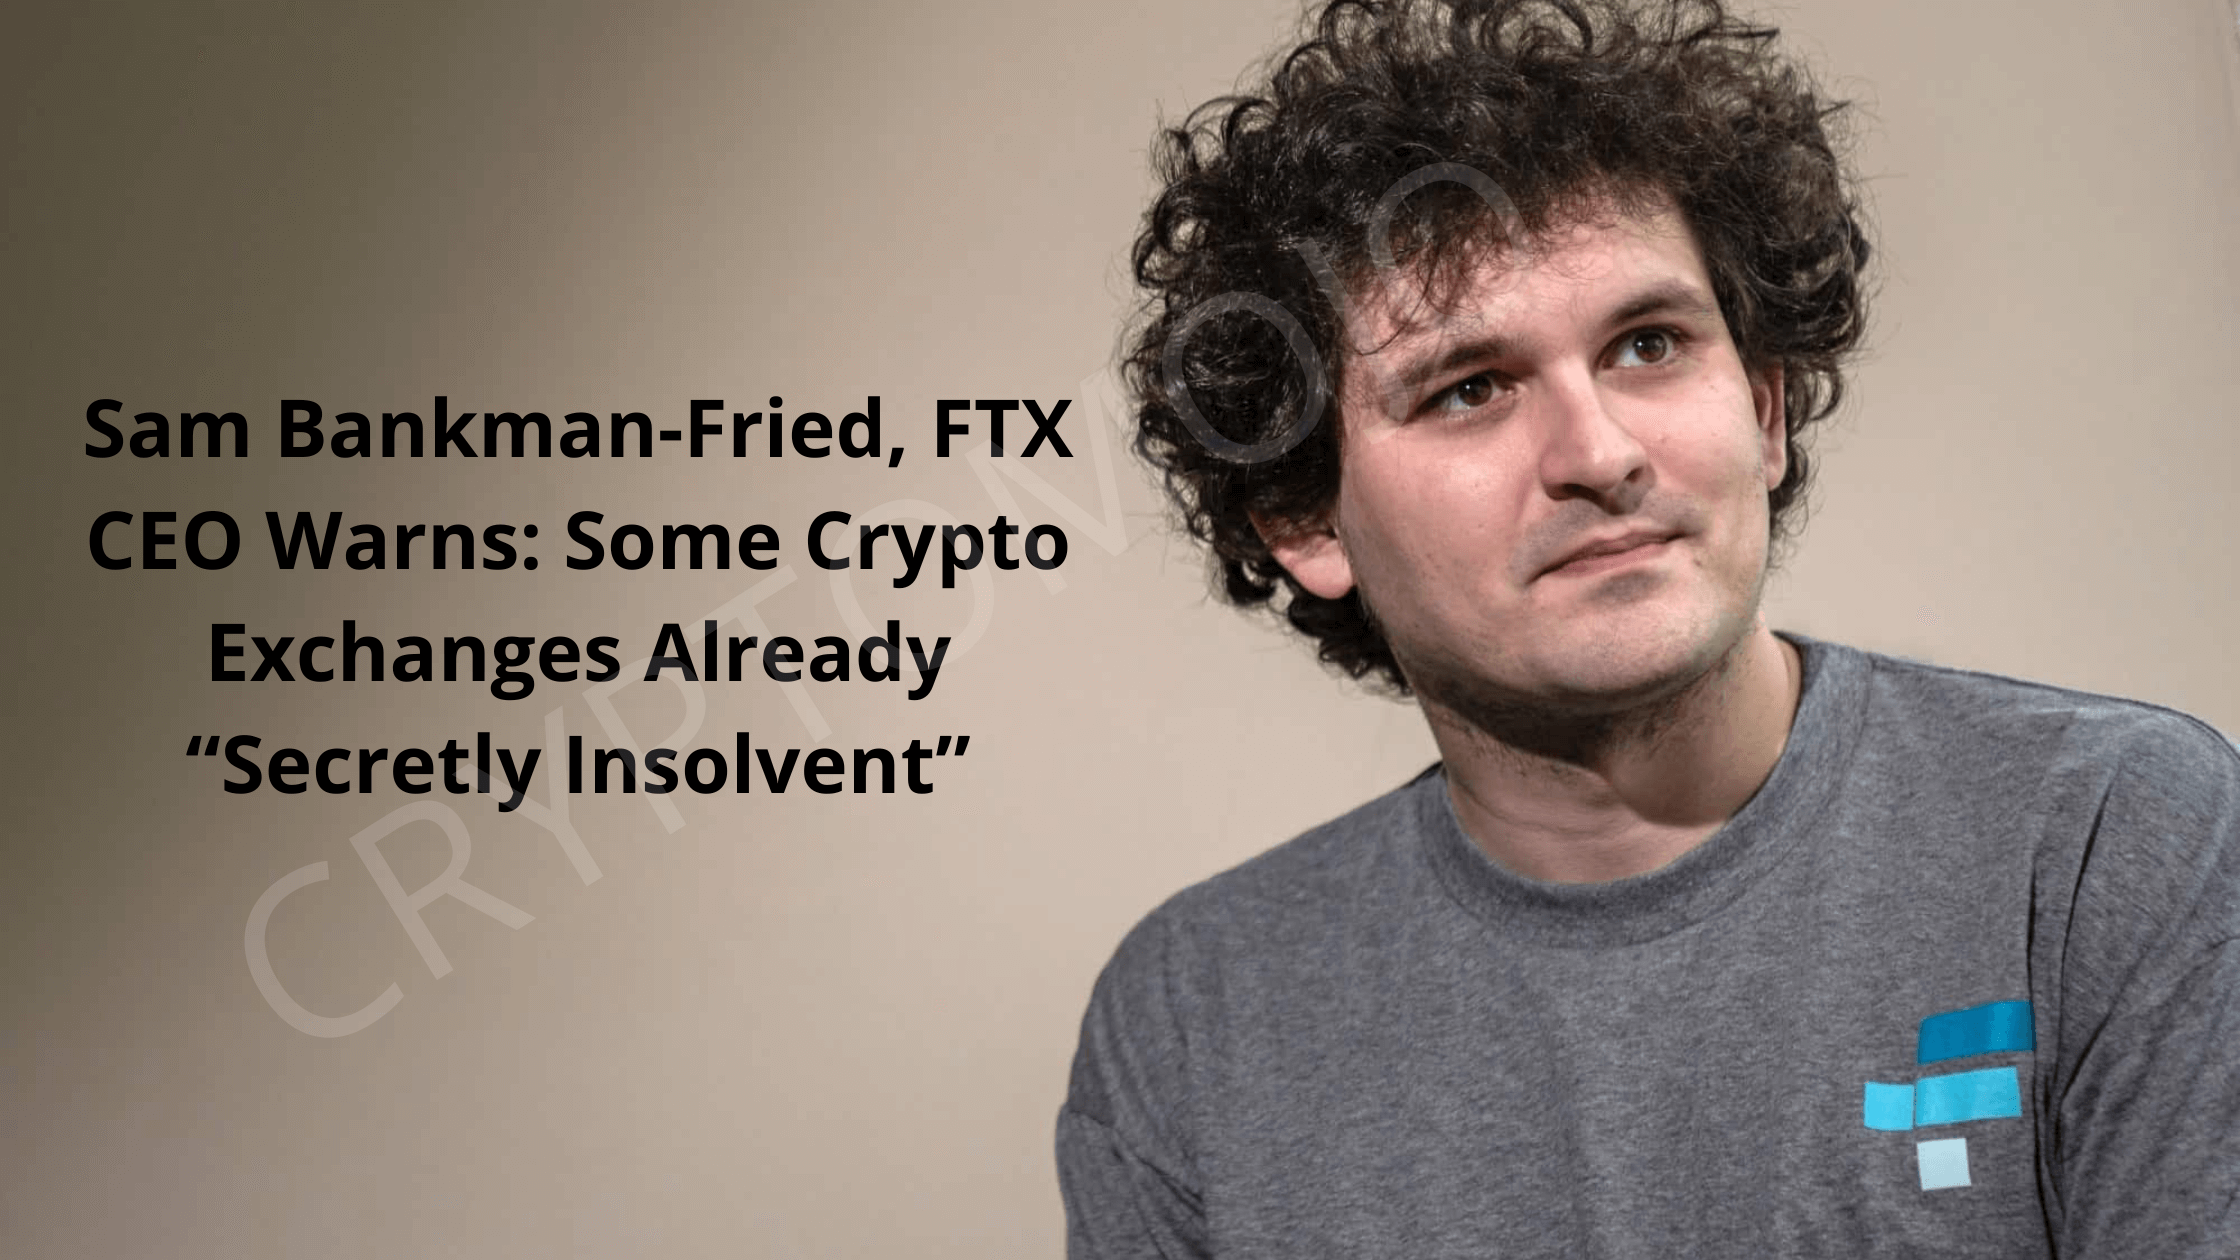 Sam Bankman Fried, FTX CEO Warns: Some Crypto Exchanges Already “Secretly Insolvent”!